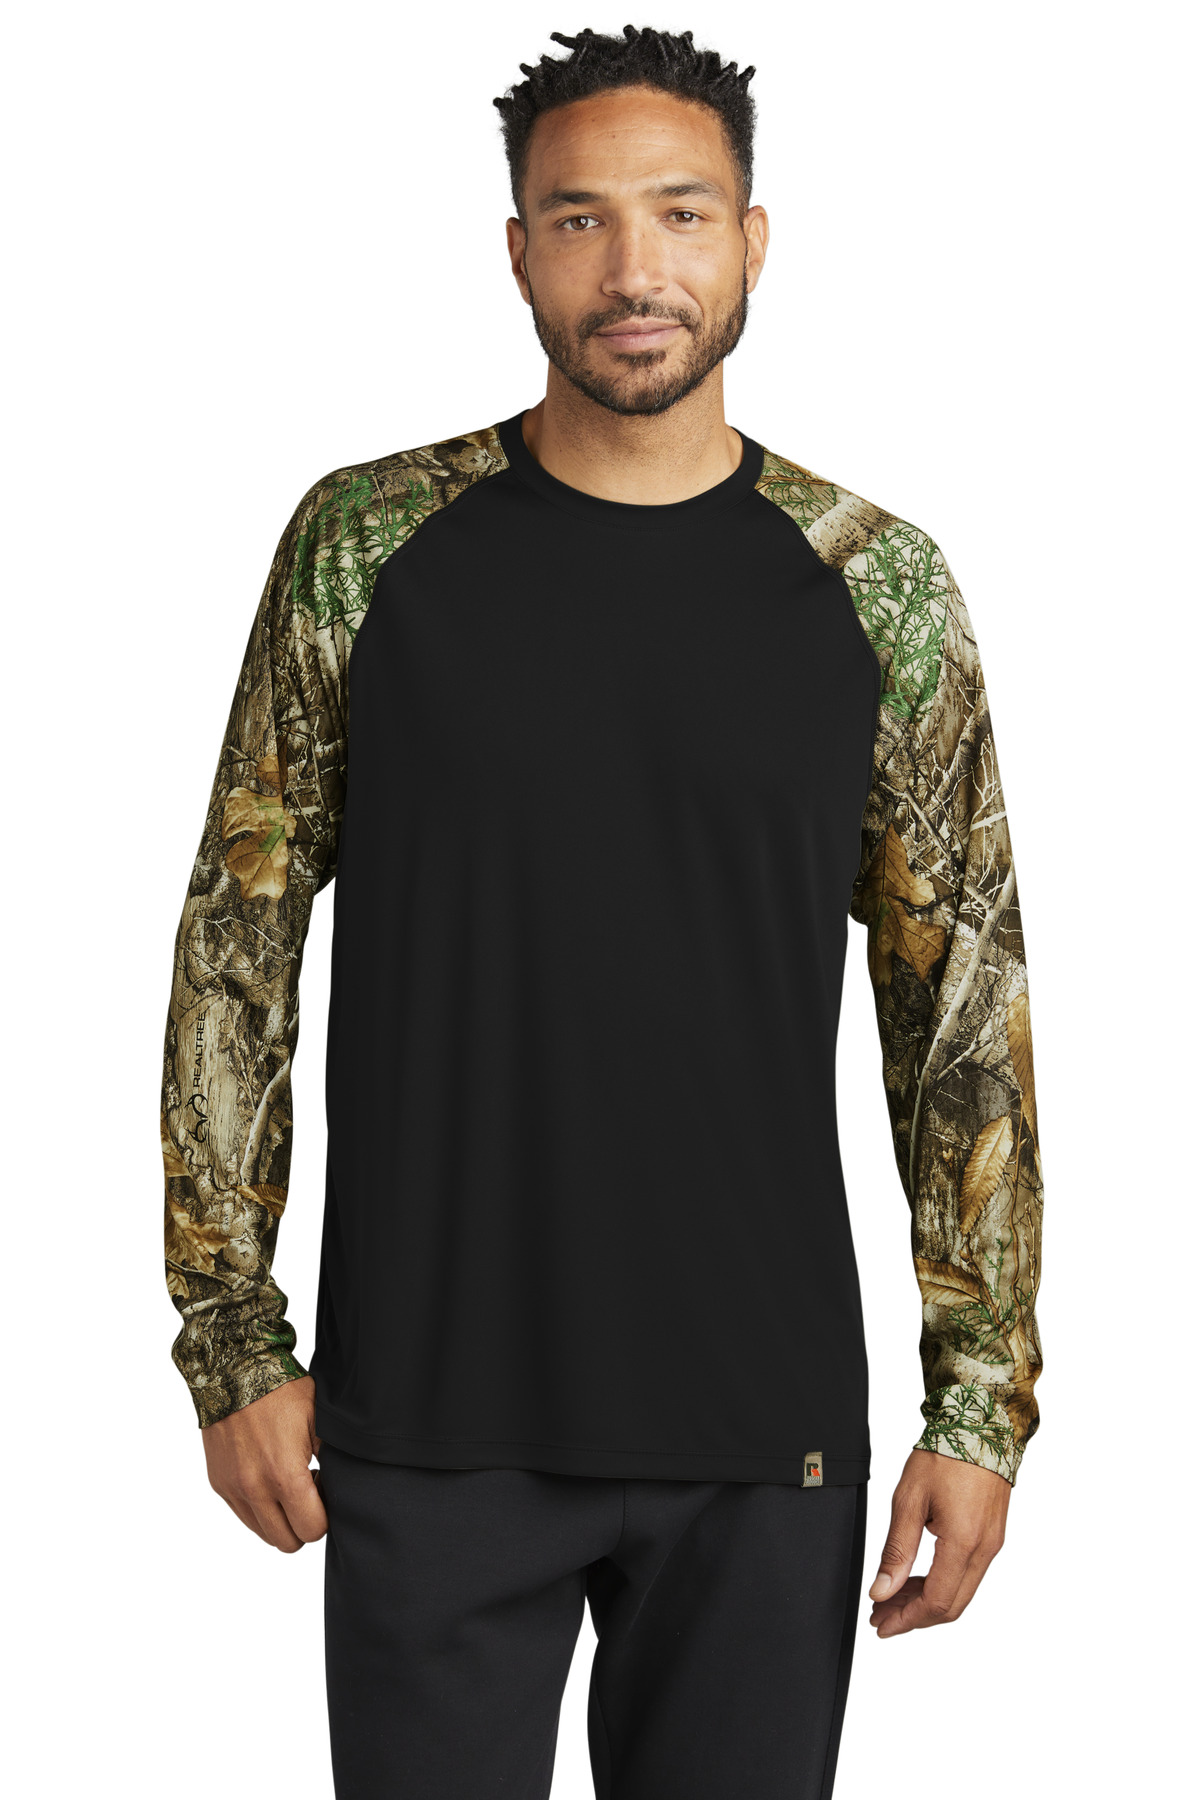 Russell Outdoors Realtree Colorblock Performance Long Sleeve Tee-Russell Outdoors